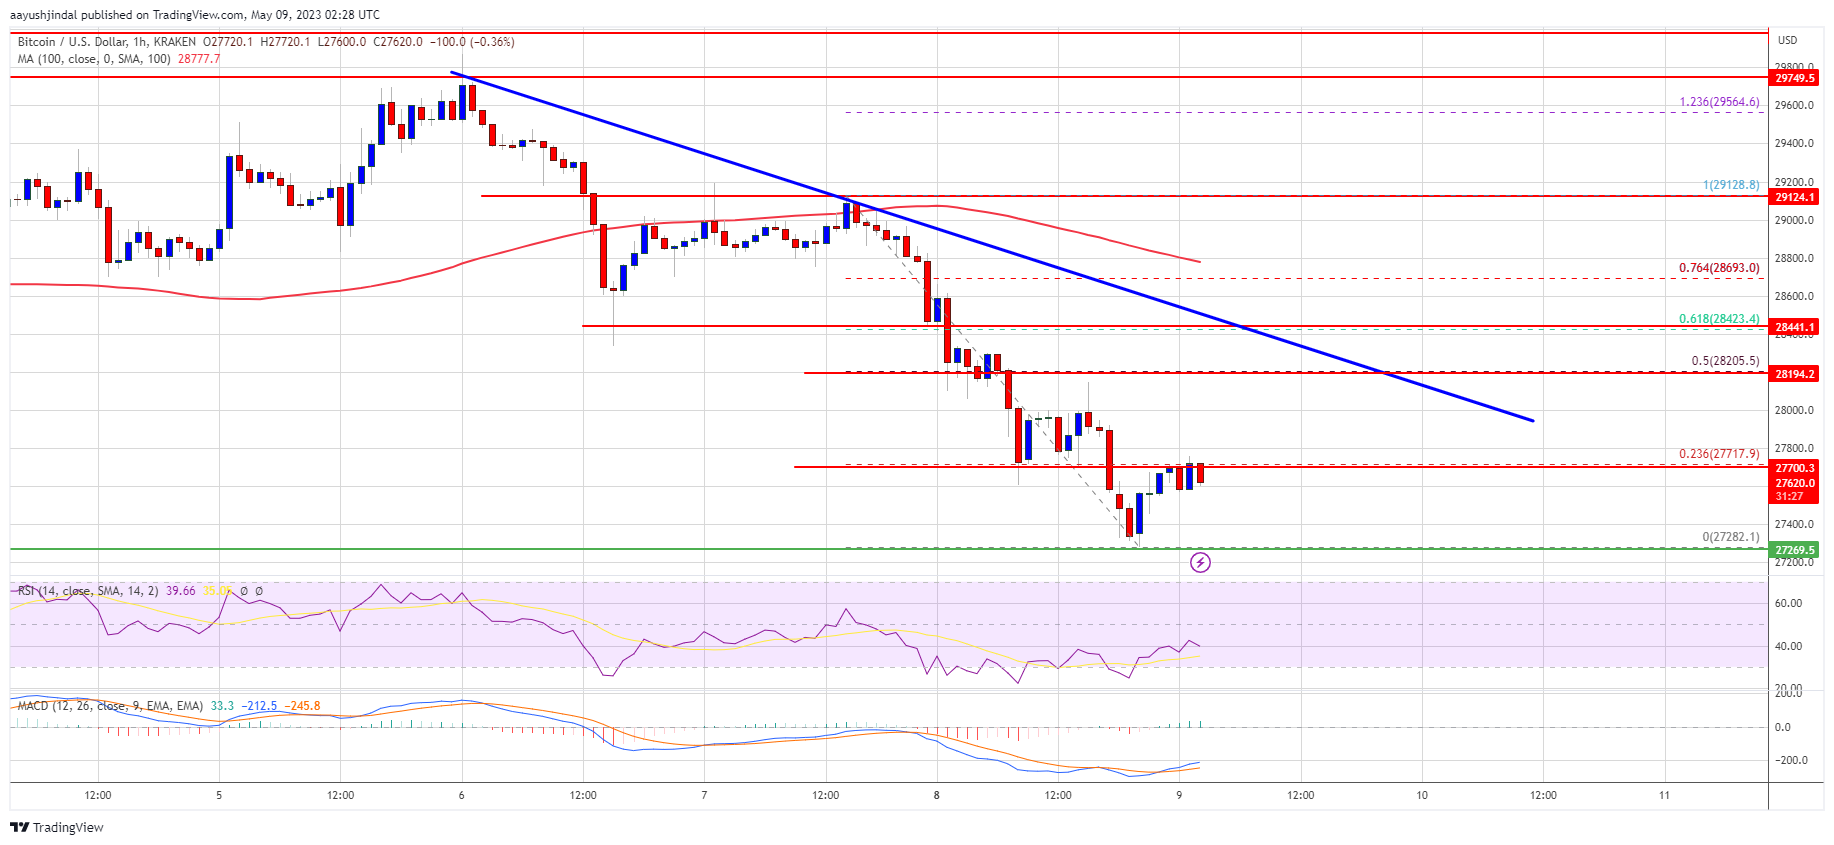 Bitcoin Bears Gains Strength – Is This Renewed Downtrend or Just Correction